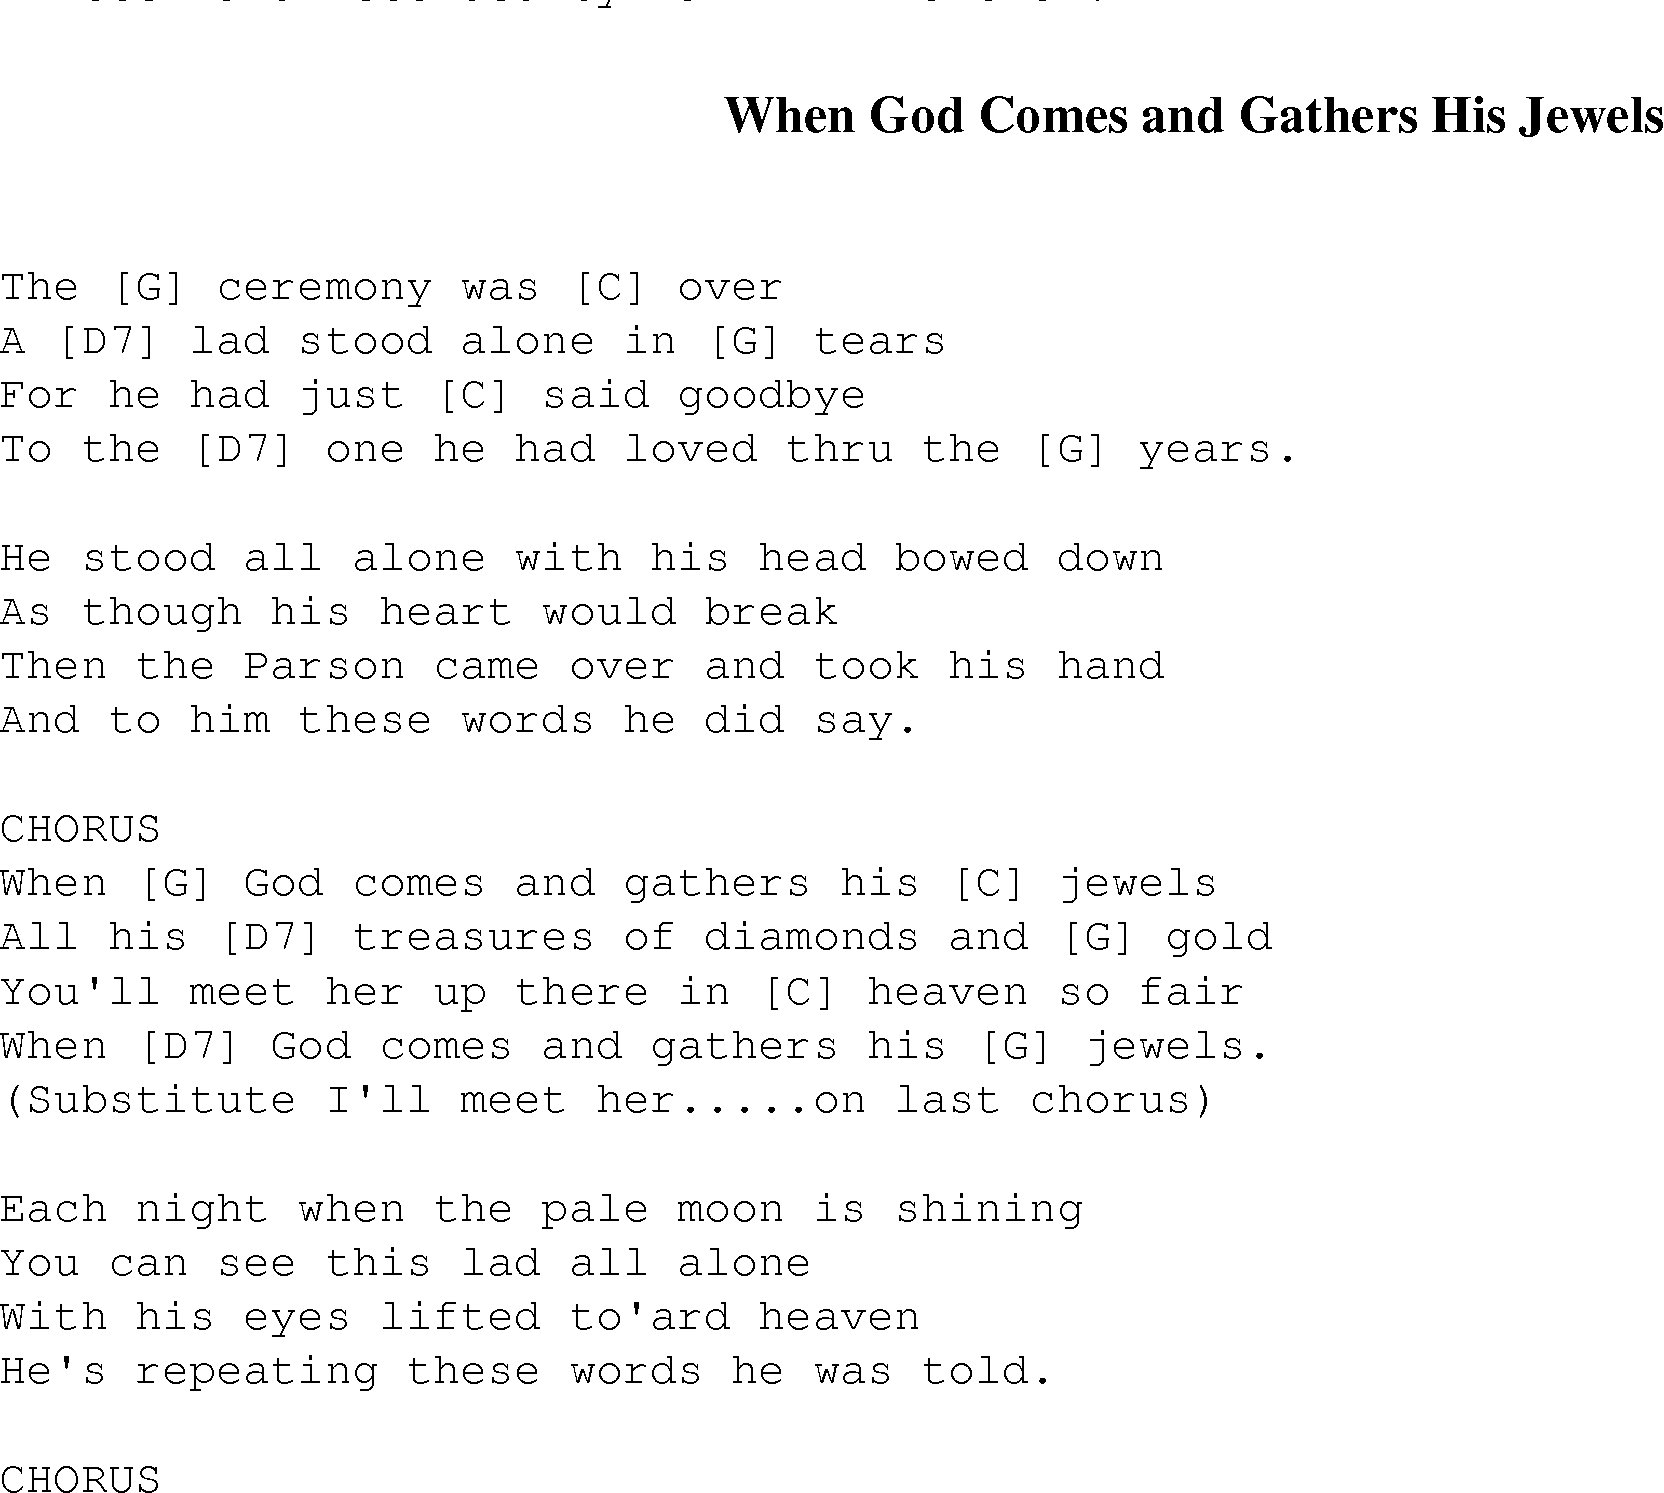 Gospel Song: when_god_gathers_jewels, lyrics and chords.